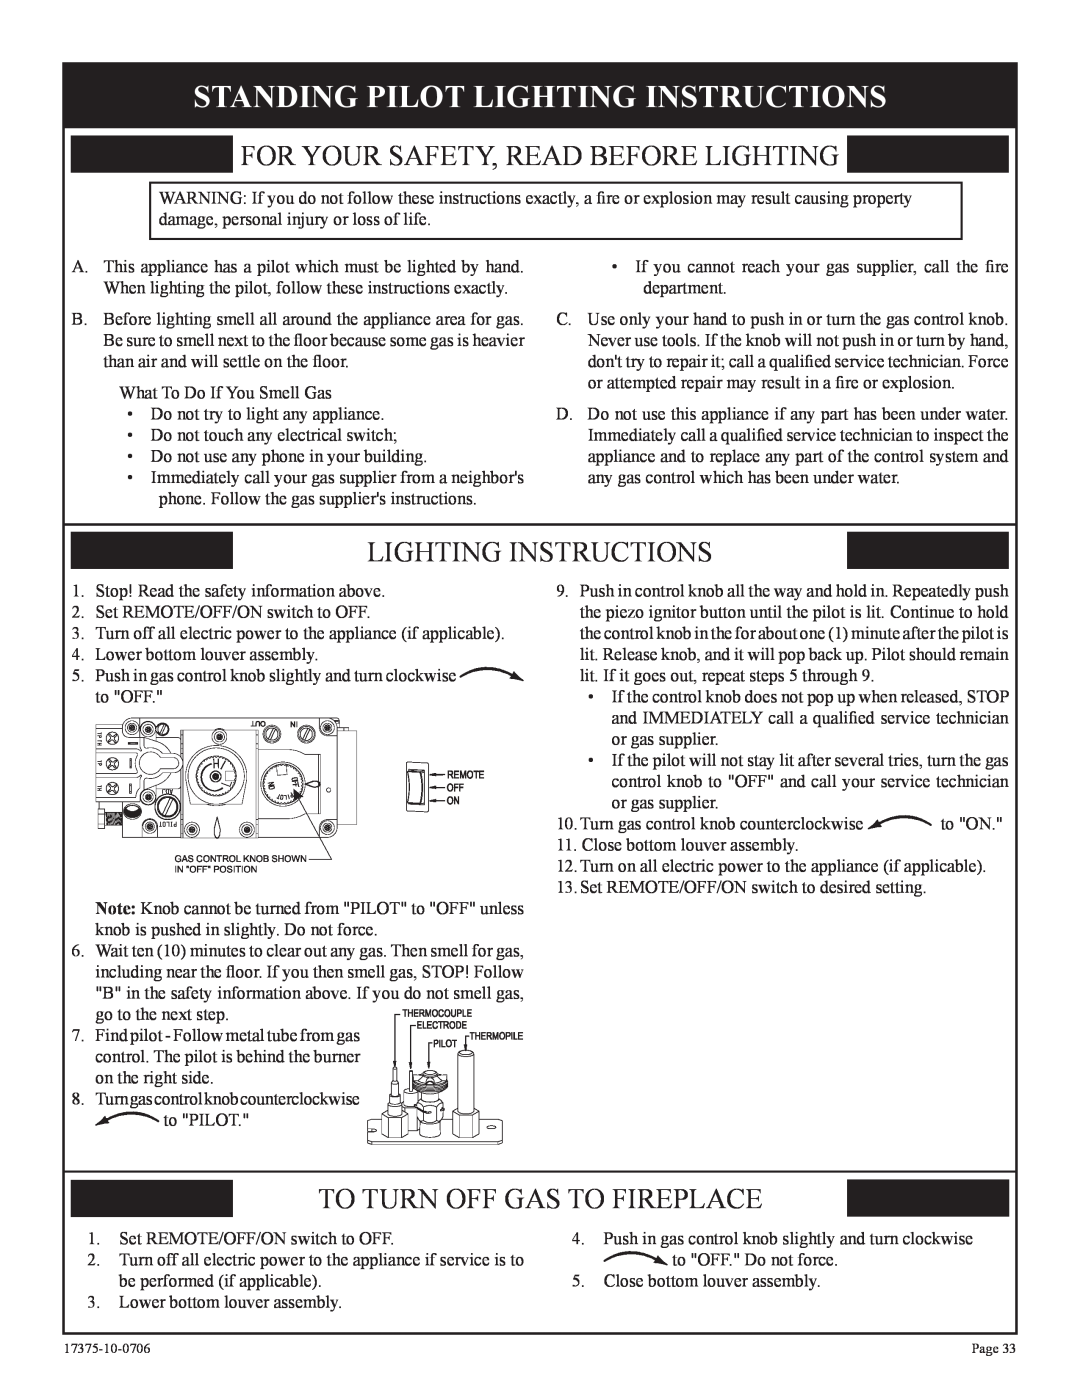 Empire Comfort Systems DVP42FP3(0,1,2,3)(N,P)-1 Standing Pilot Lighting Instructions, To Turn Off Gas To Fireplace 